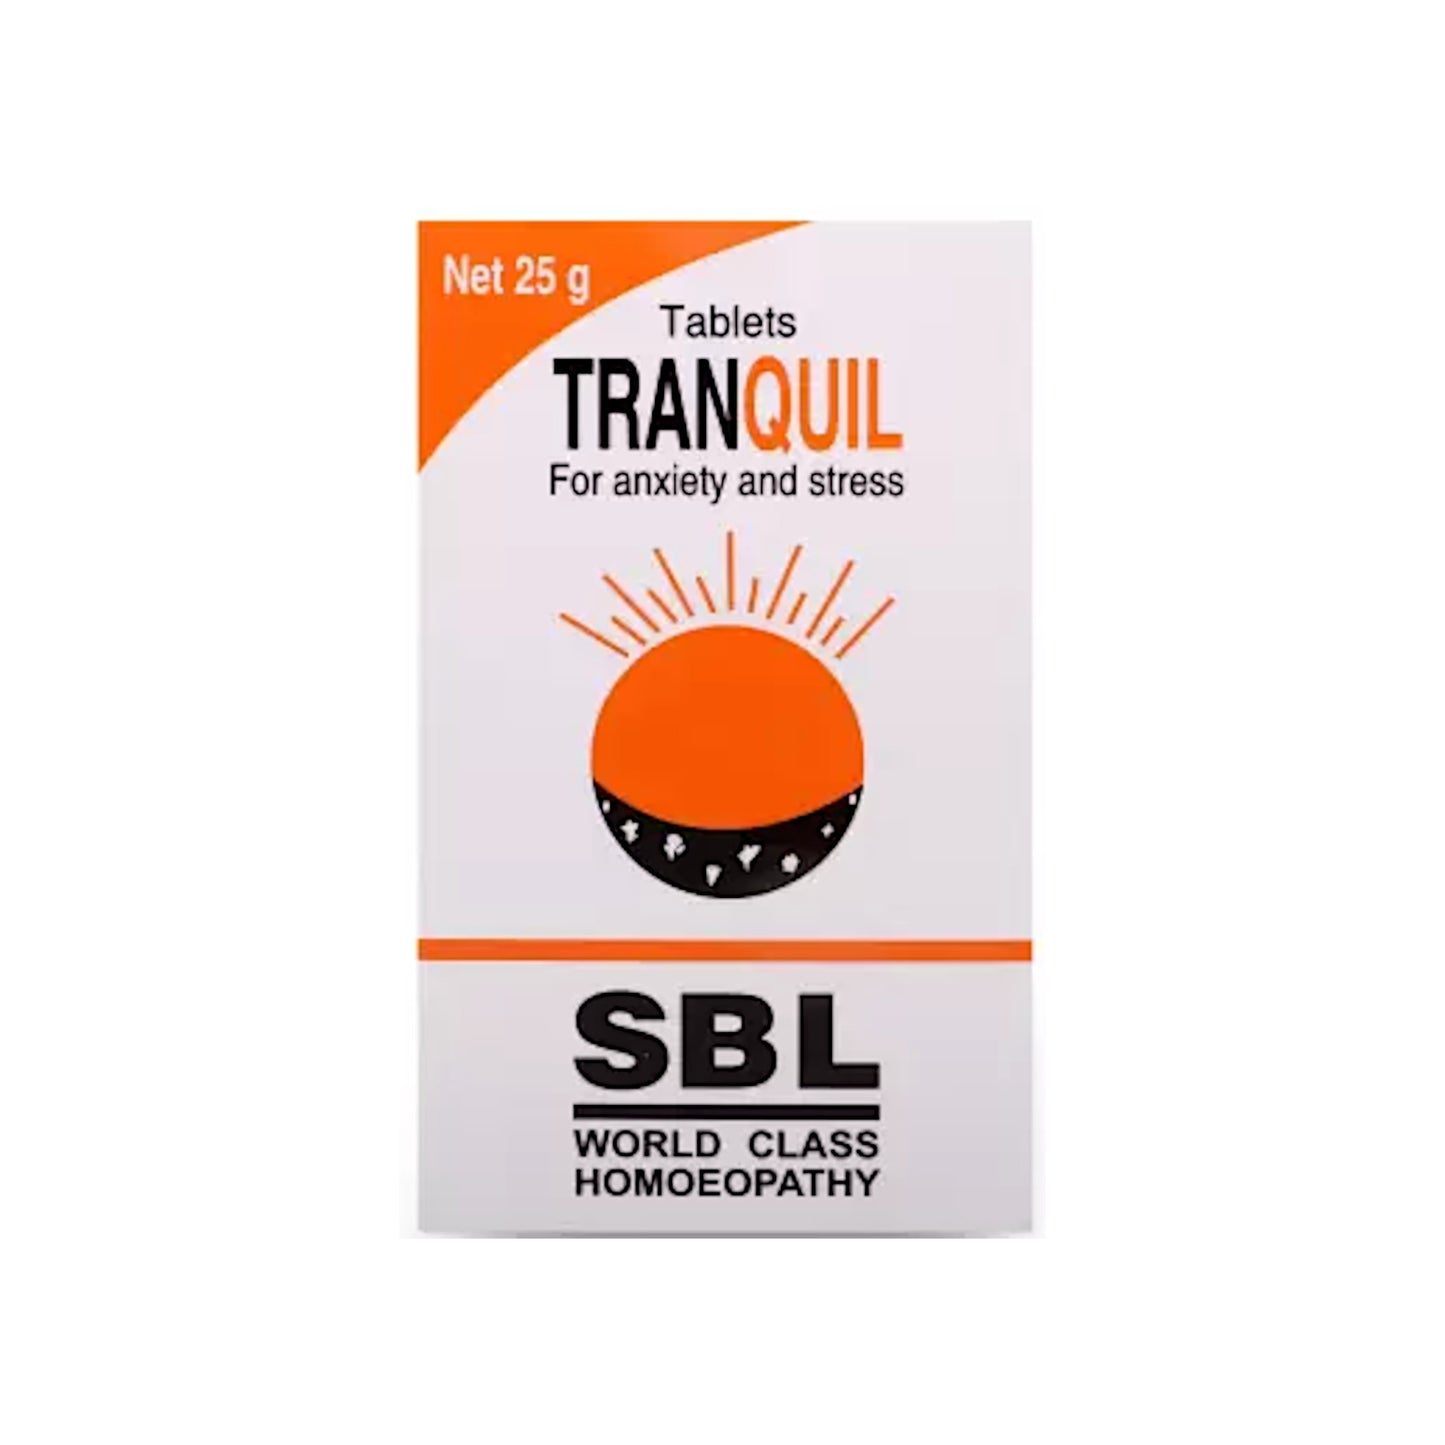 Image: SBL Tranquil Tablets 25 g - Homeopathic Relief for Stress and Anxiety.